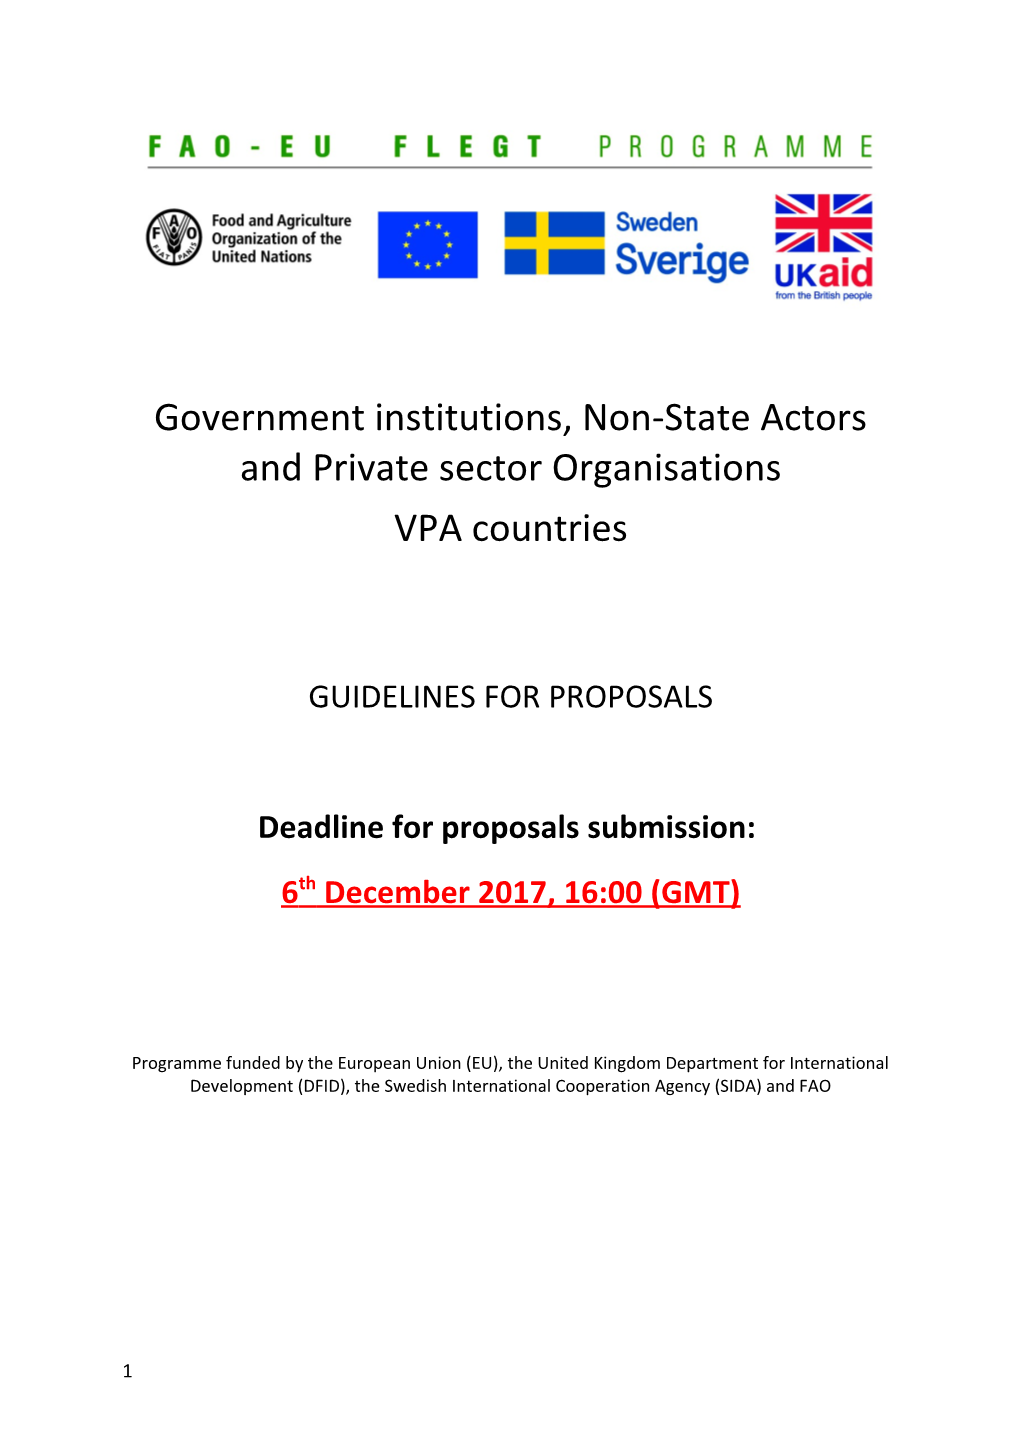 Government Institutions, Non-State Actors and Private Sector Organisations